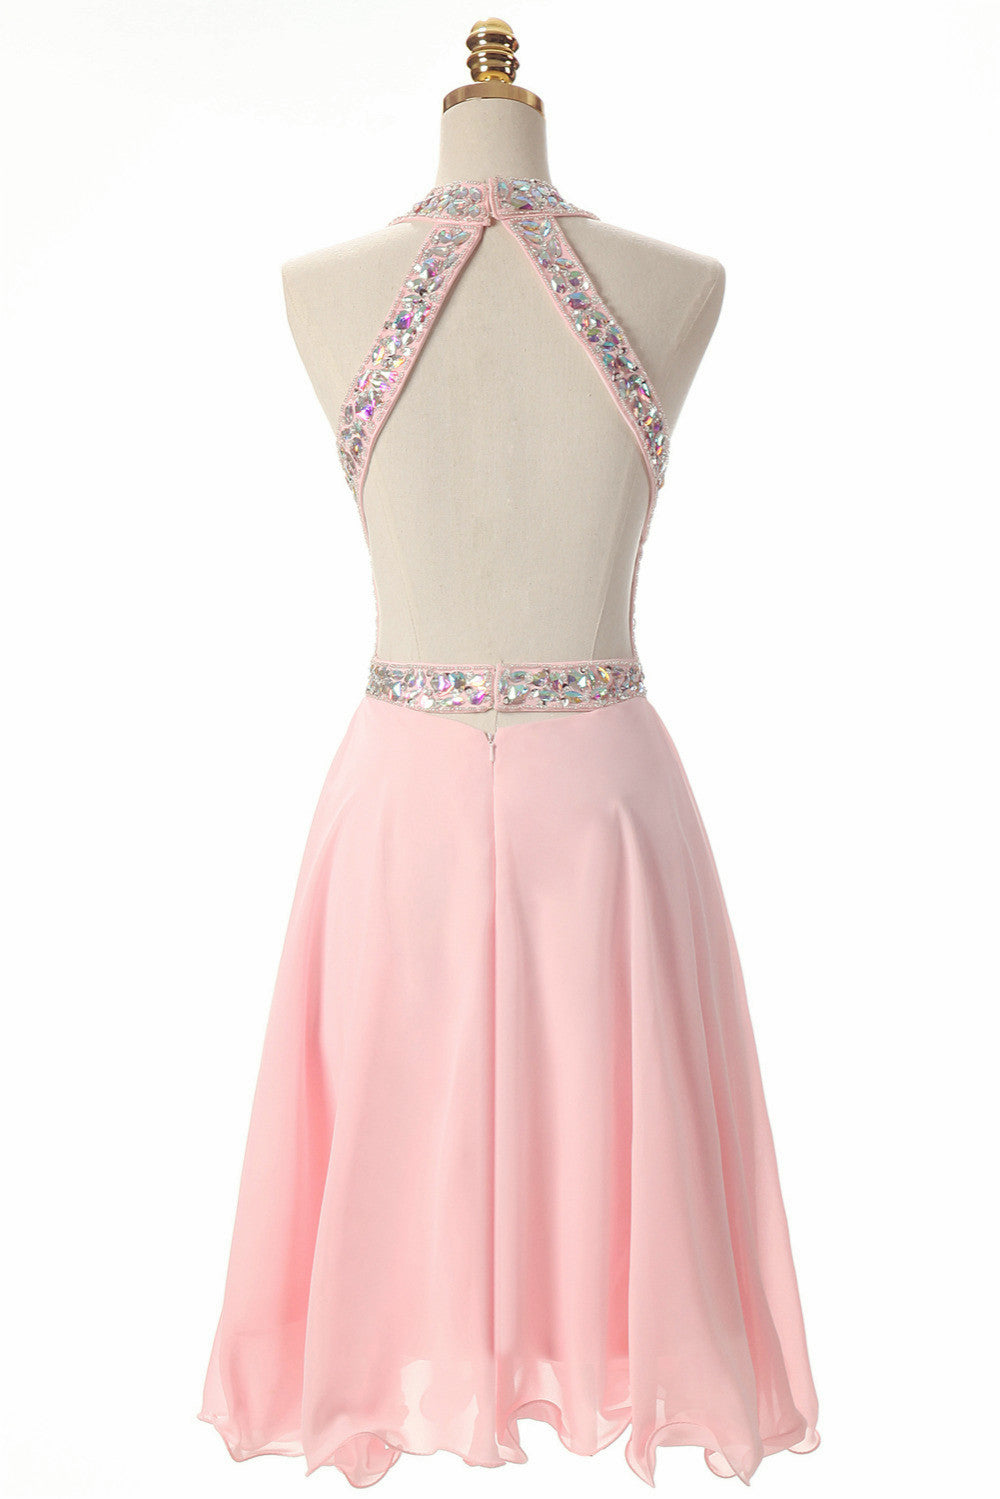 Pink Beaded Short Chiffon New Style Formal Dress , Pink Homecoming Dresses, Short Party Dresses